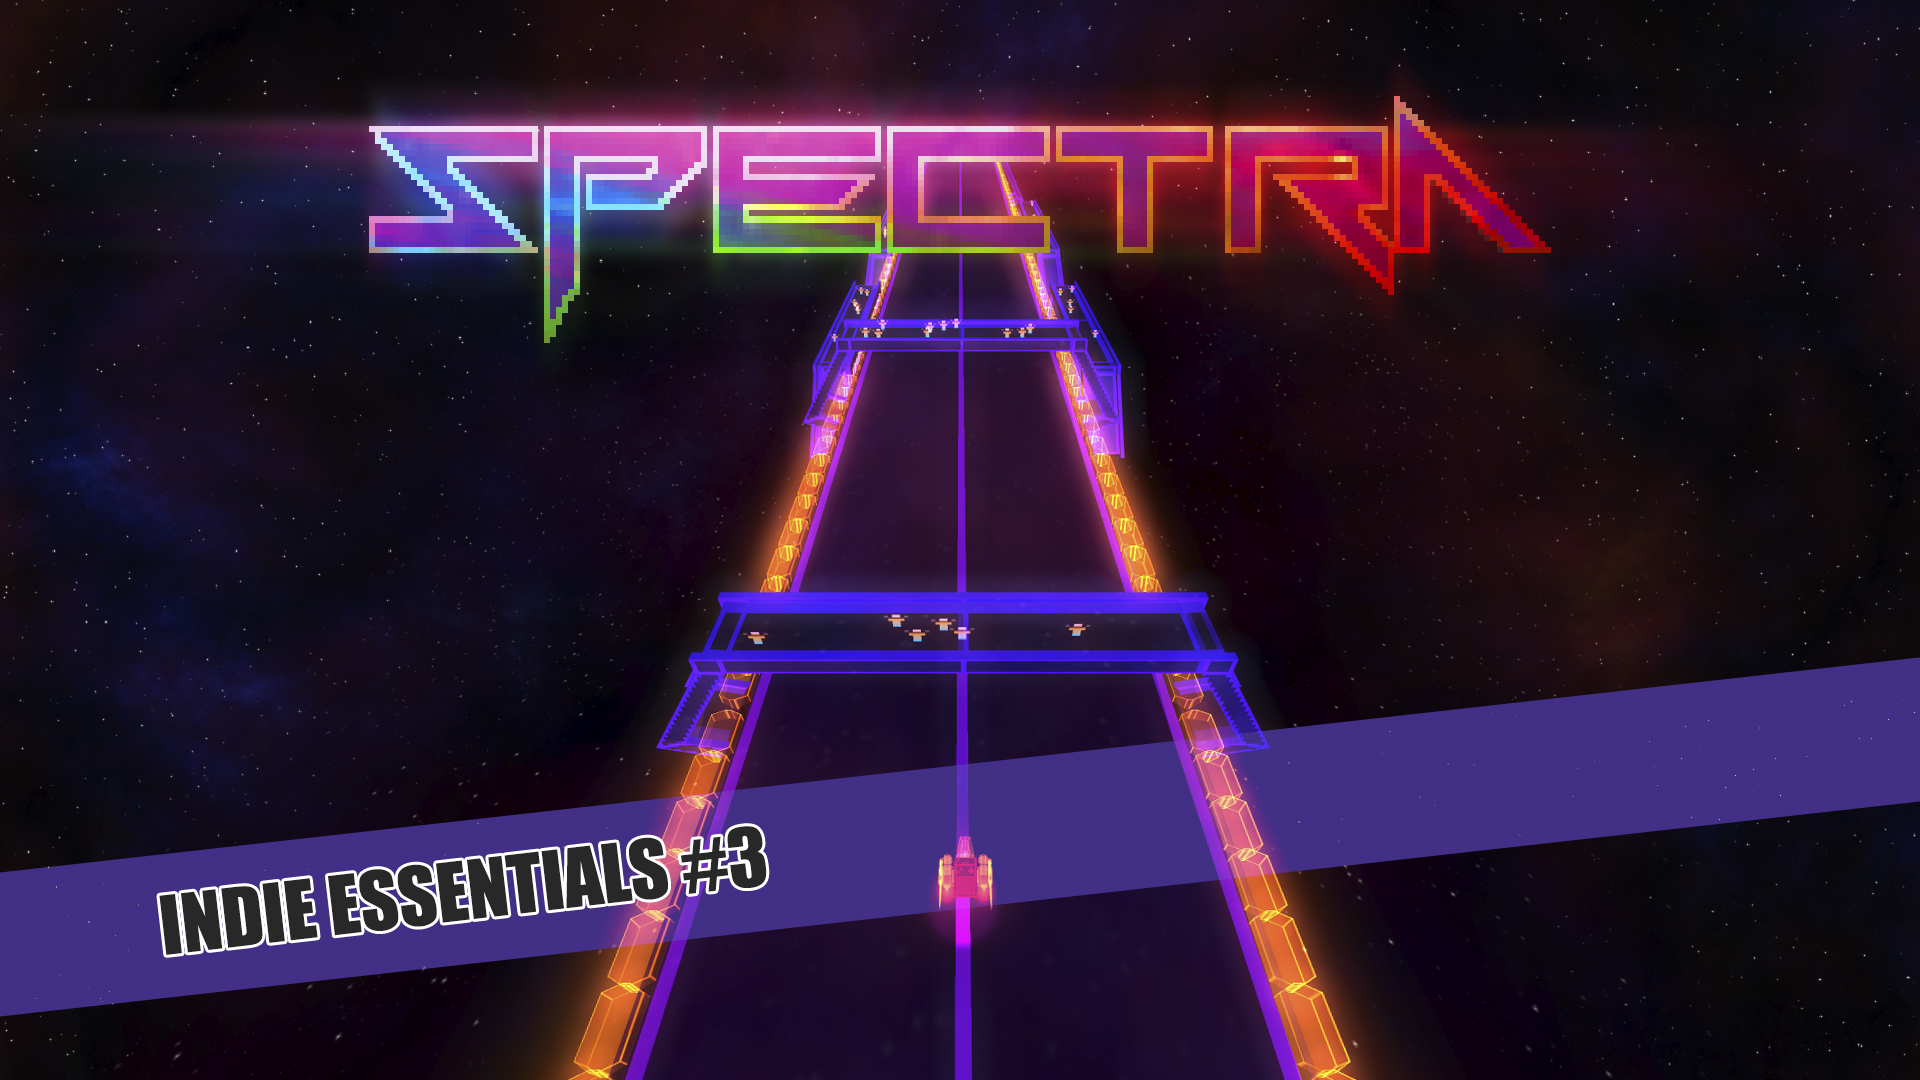 Cover image for Indie Essentials video #3, about the video Spectra